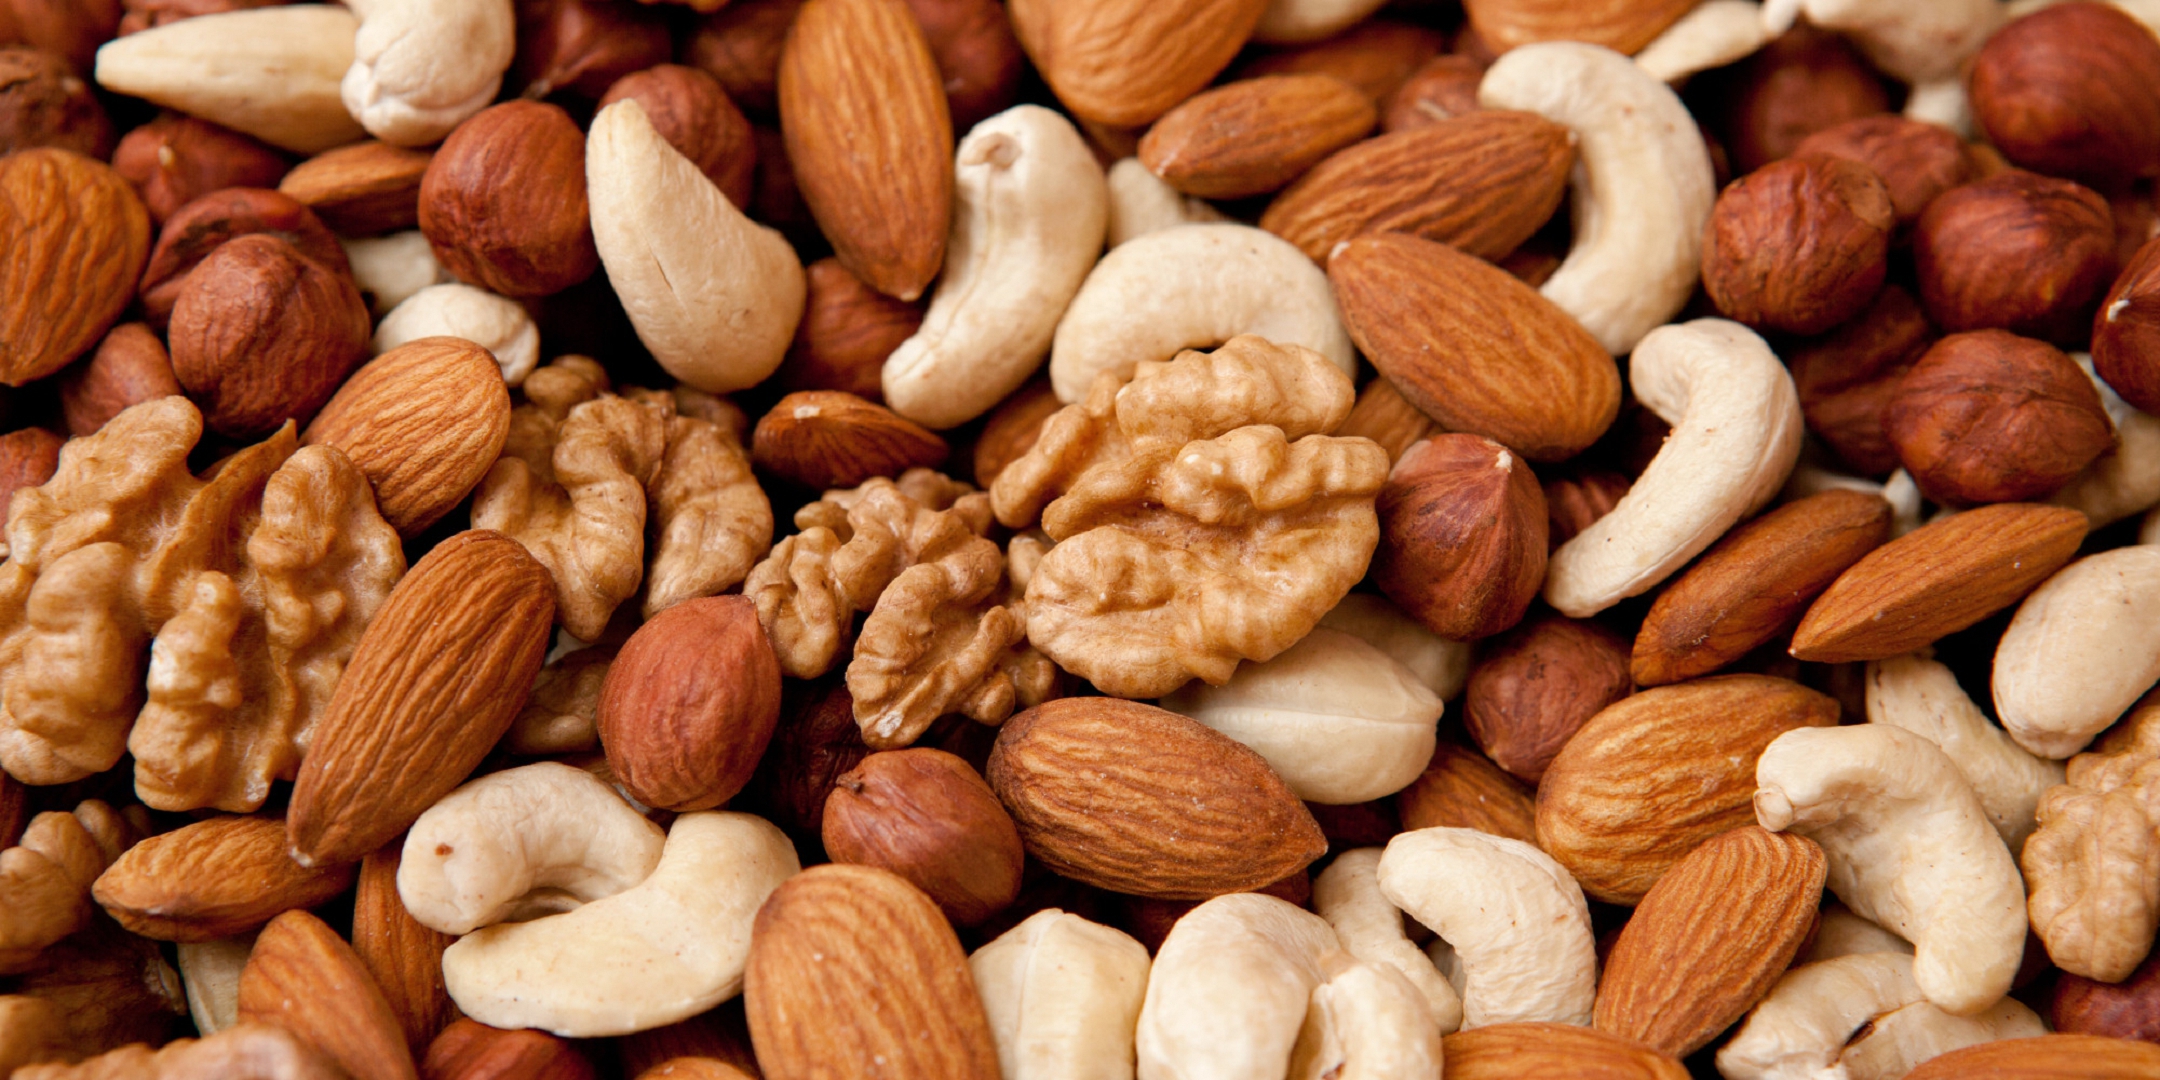 Nuts Wallpaper Image Photo Picture Background